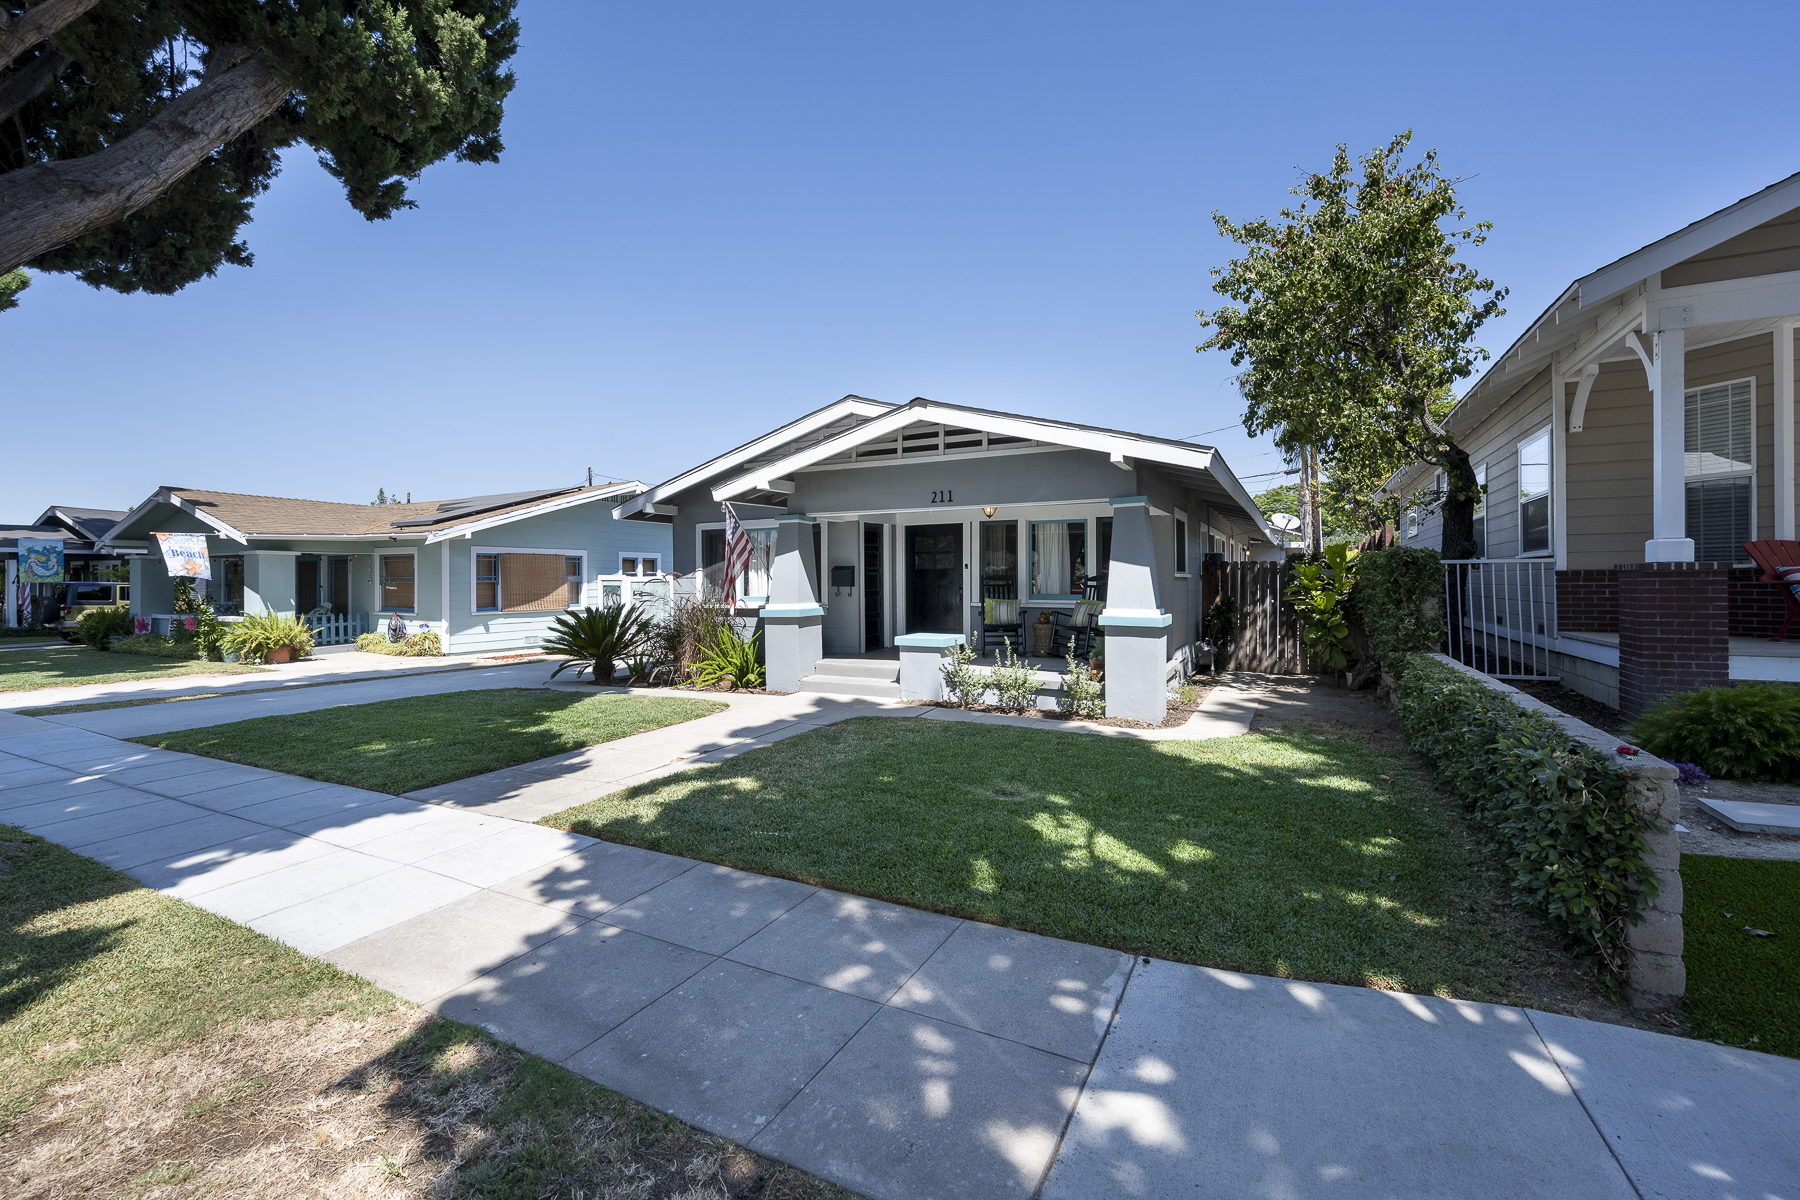 211 W. Whiting Ave, Fullerton, CA 92832